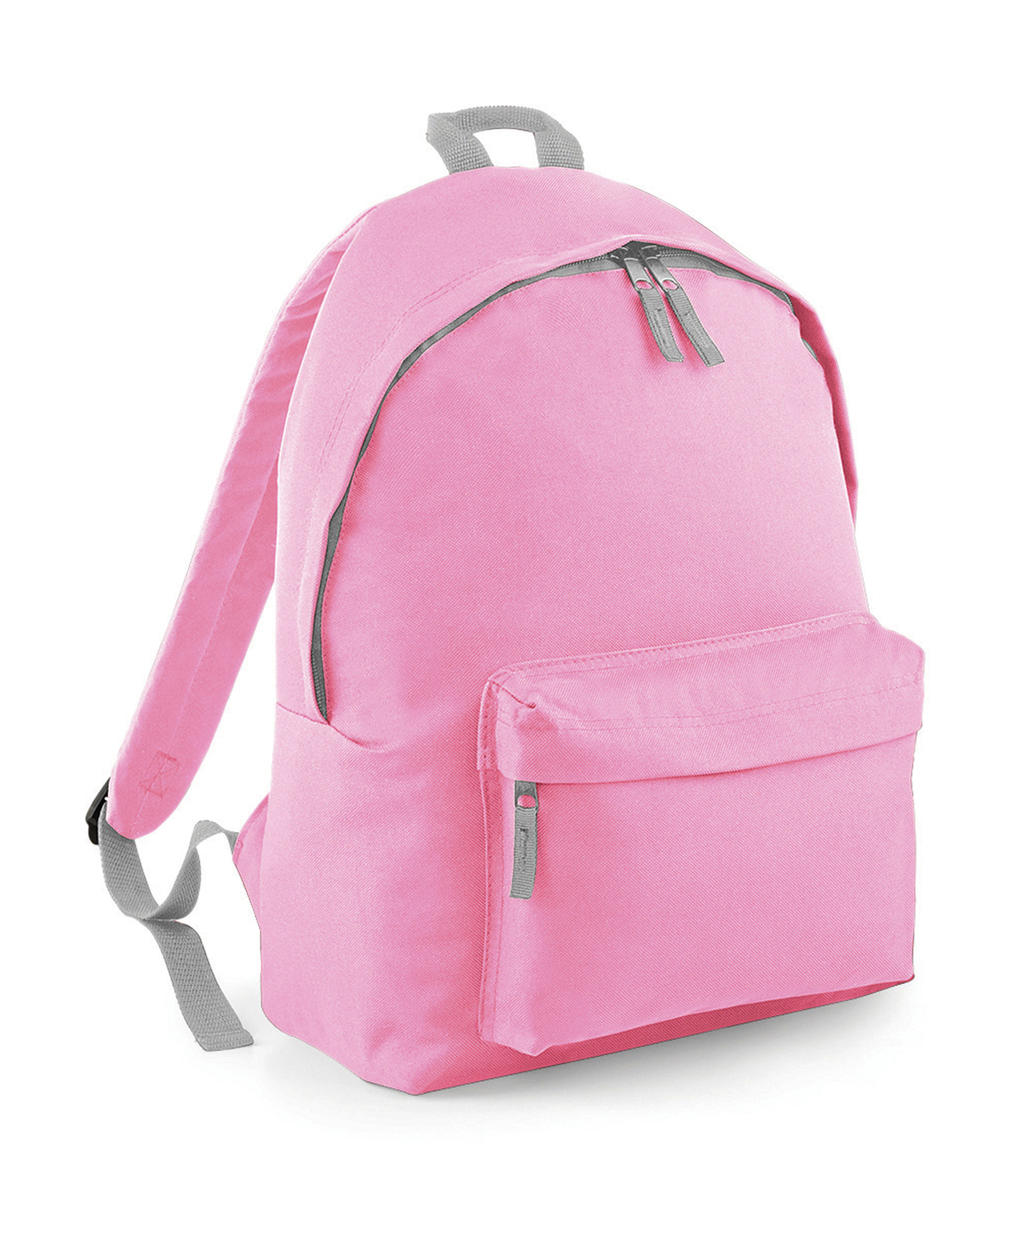  Junior Fashion Backpack in Farbe Classic Pink/Light Grey